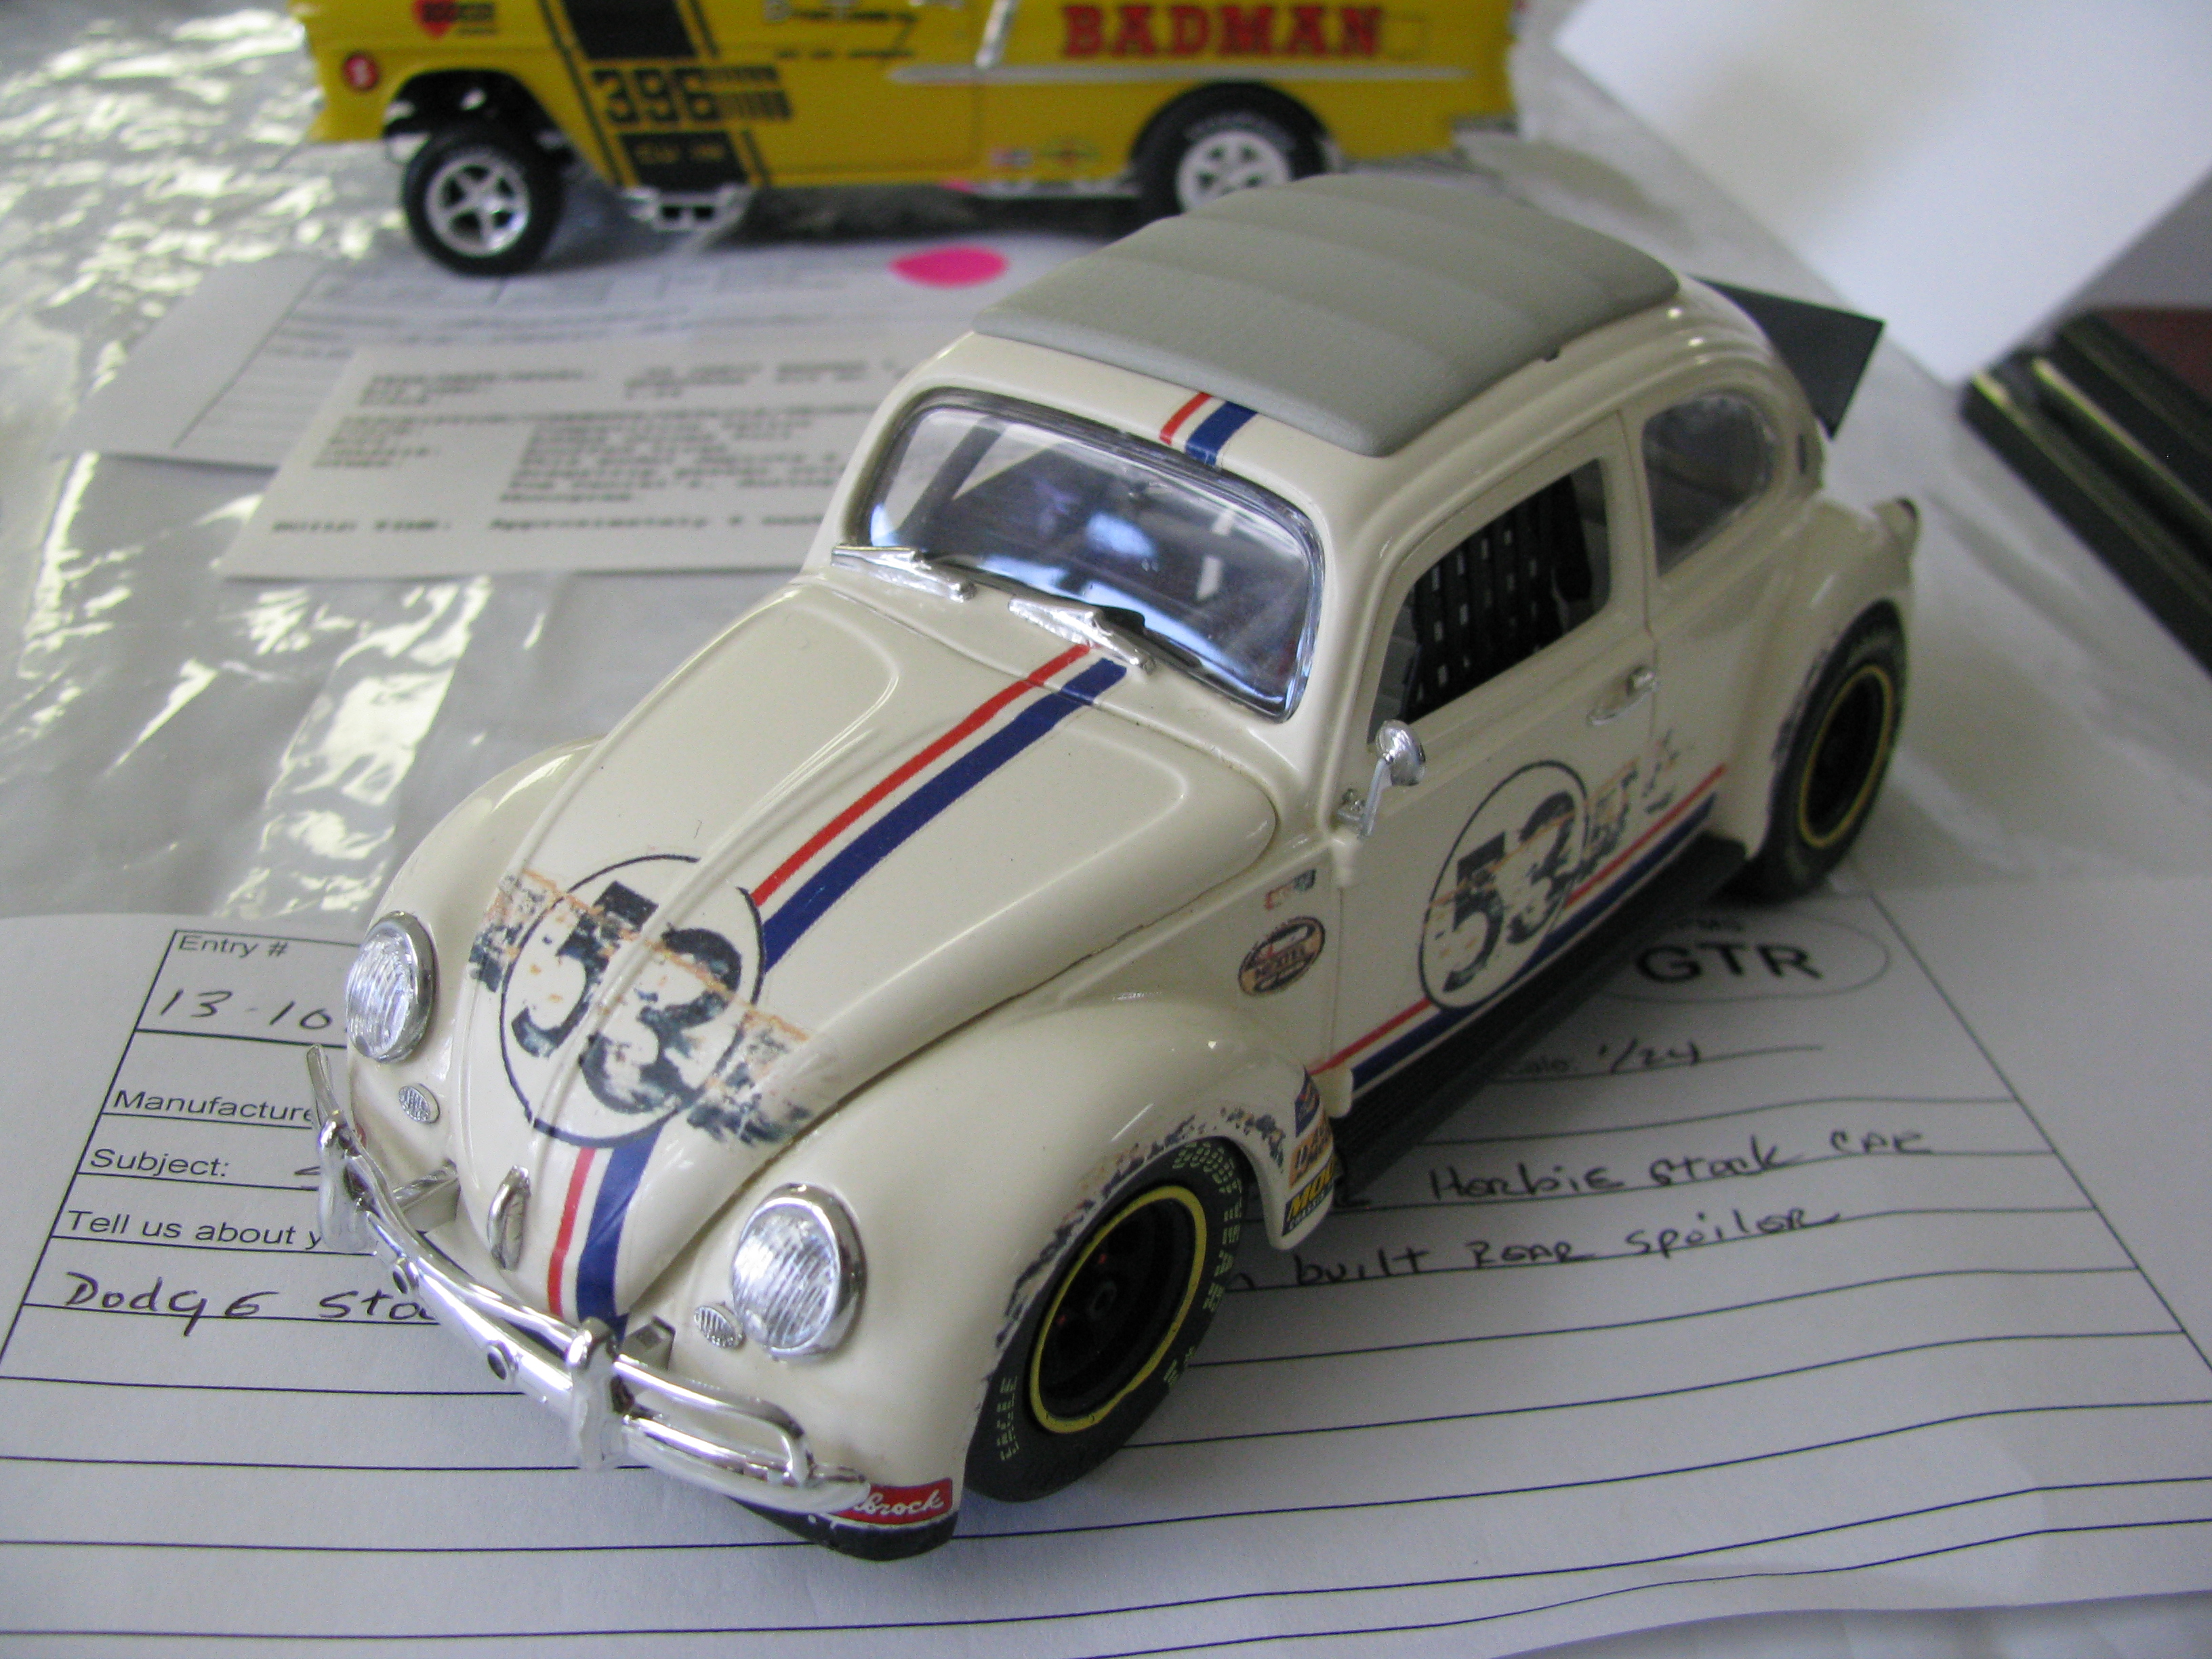 politicus fictie uitgebreid Herbie Fully Loaded - The Crittenden Automotive Library